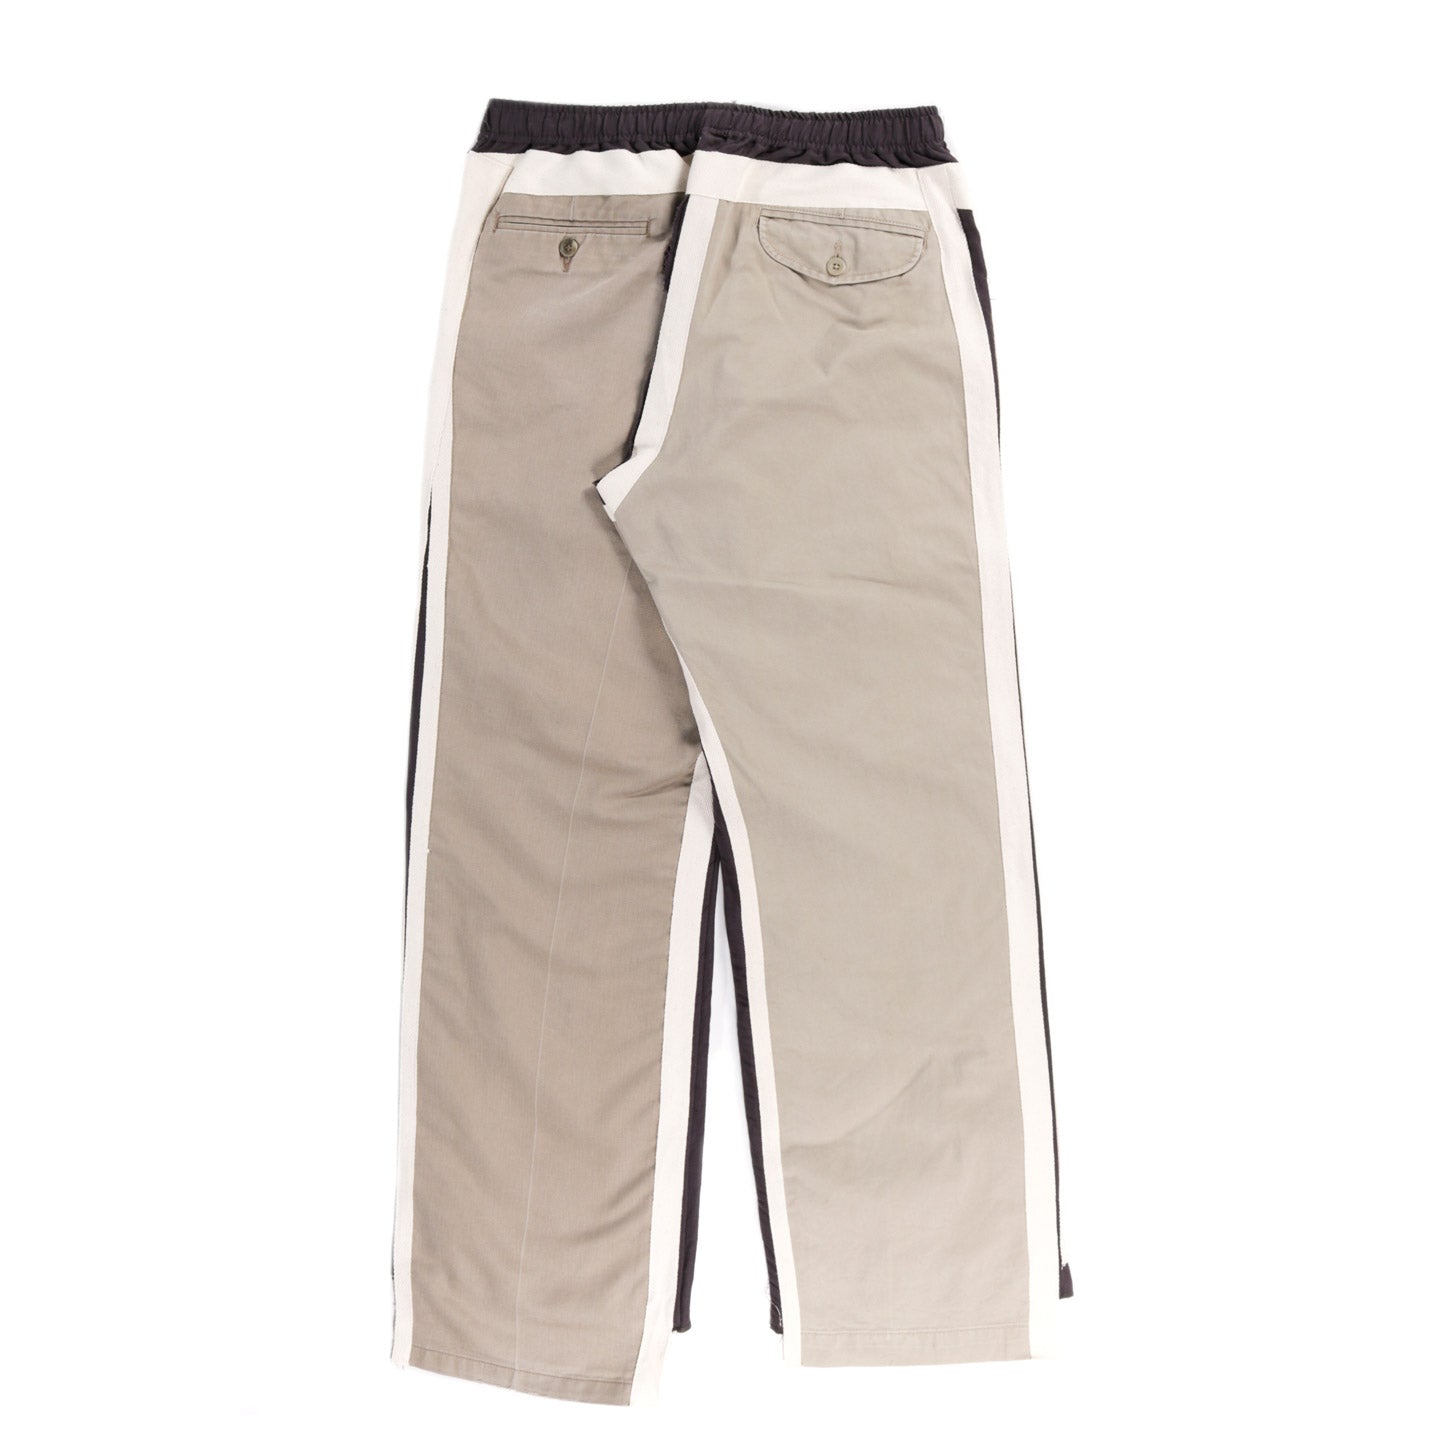 REBUILD BY NEEDLES CHINO COVERED PANT CHARCOAL - S (A)